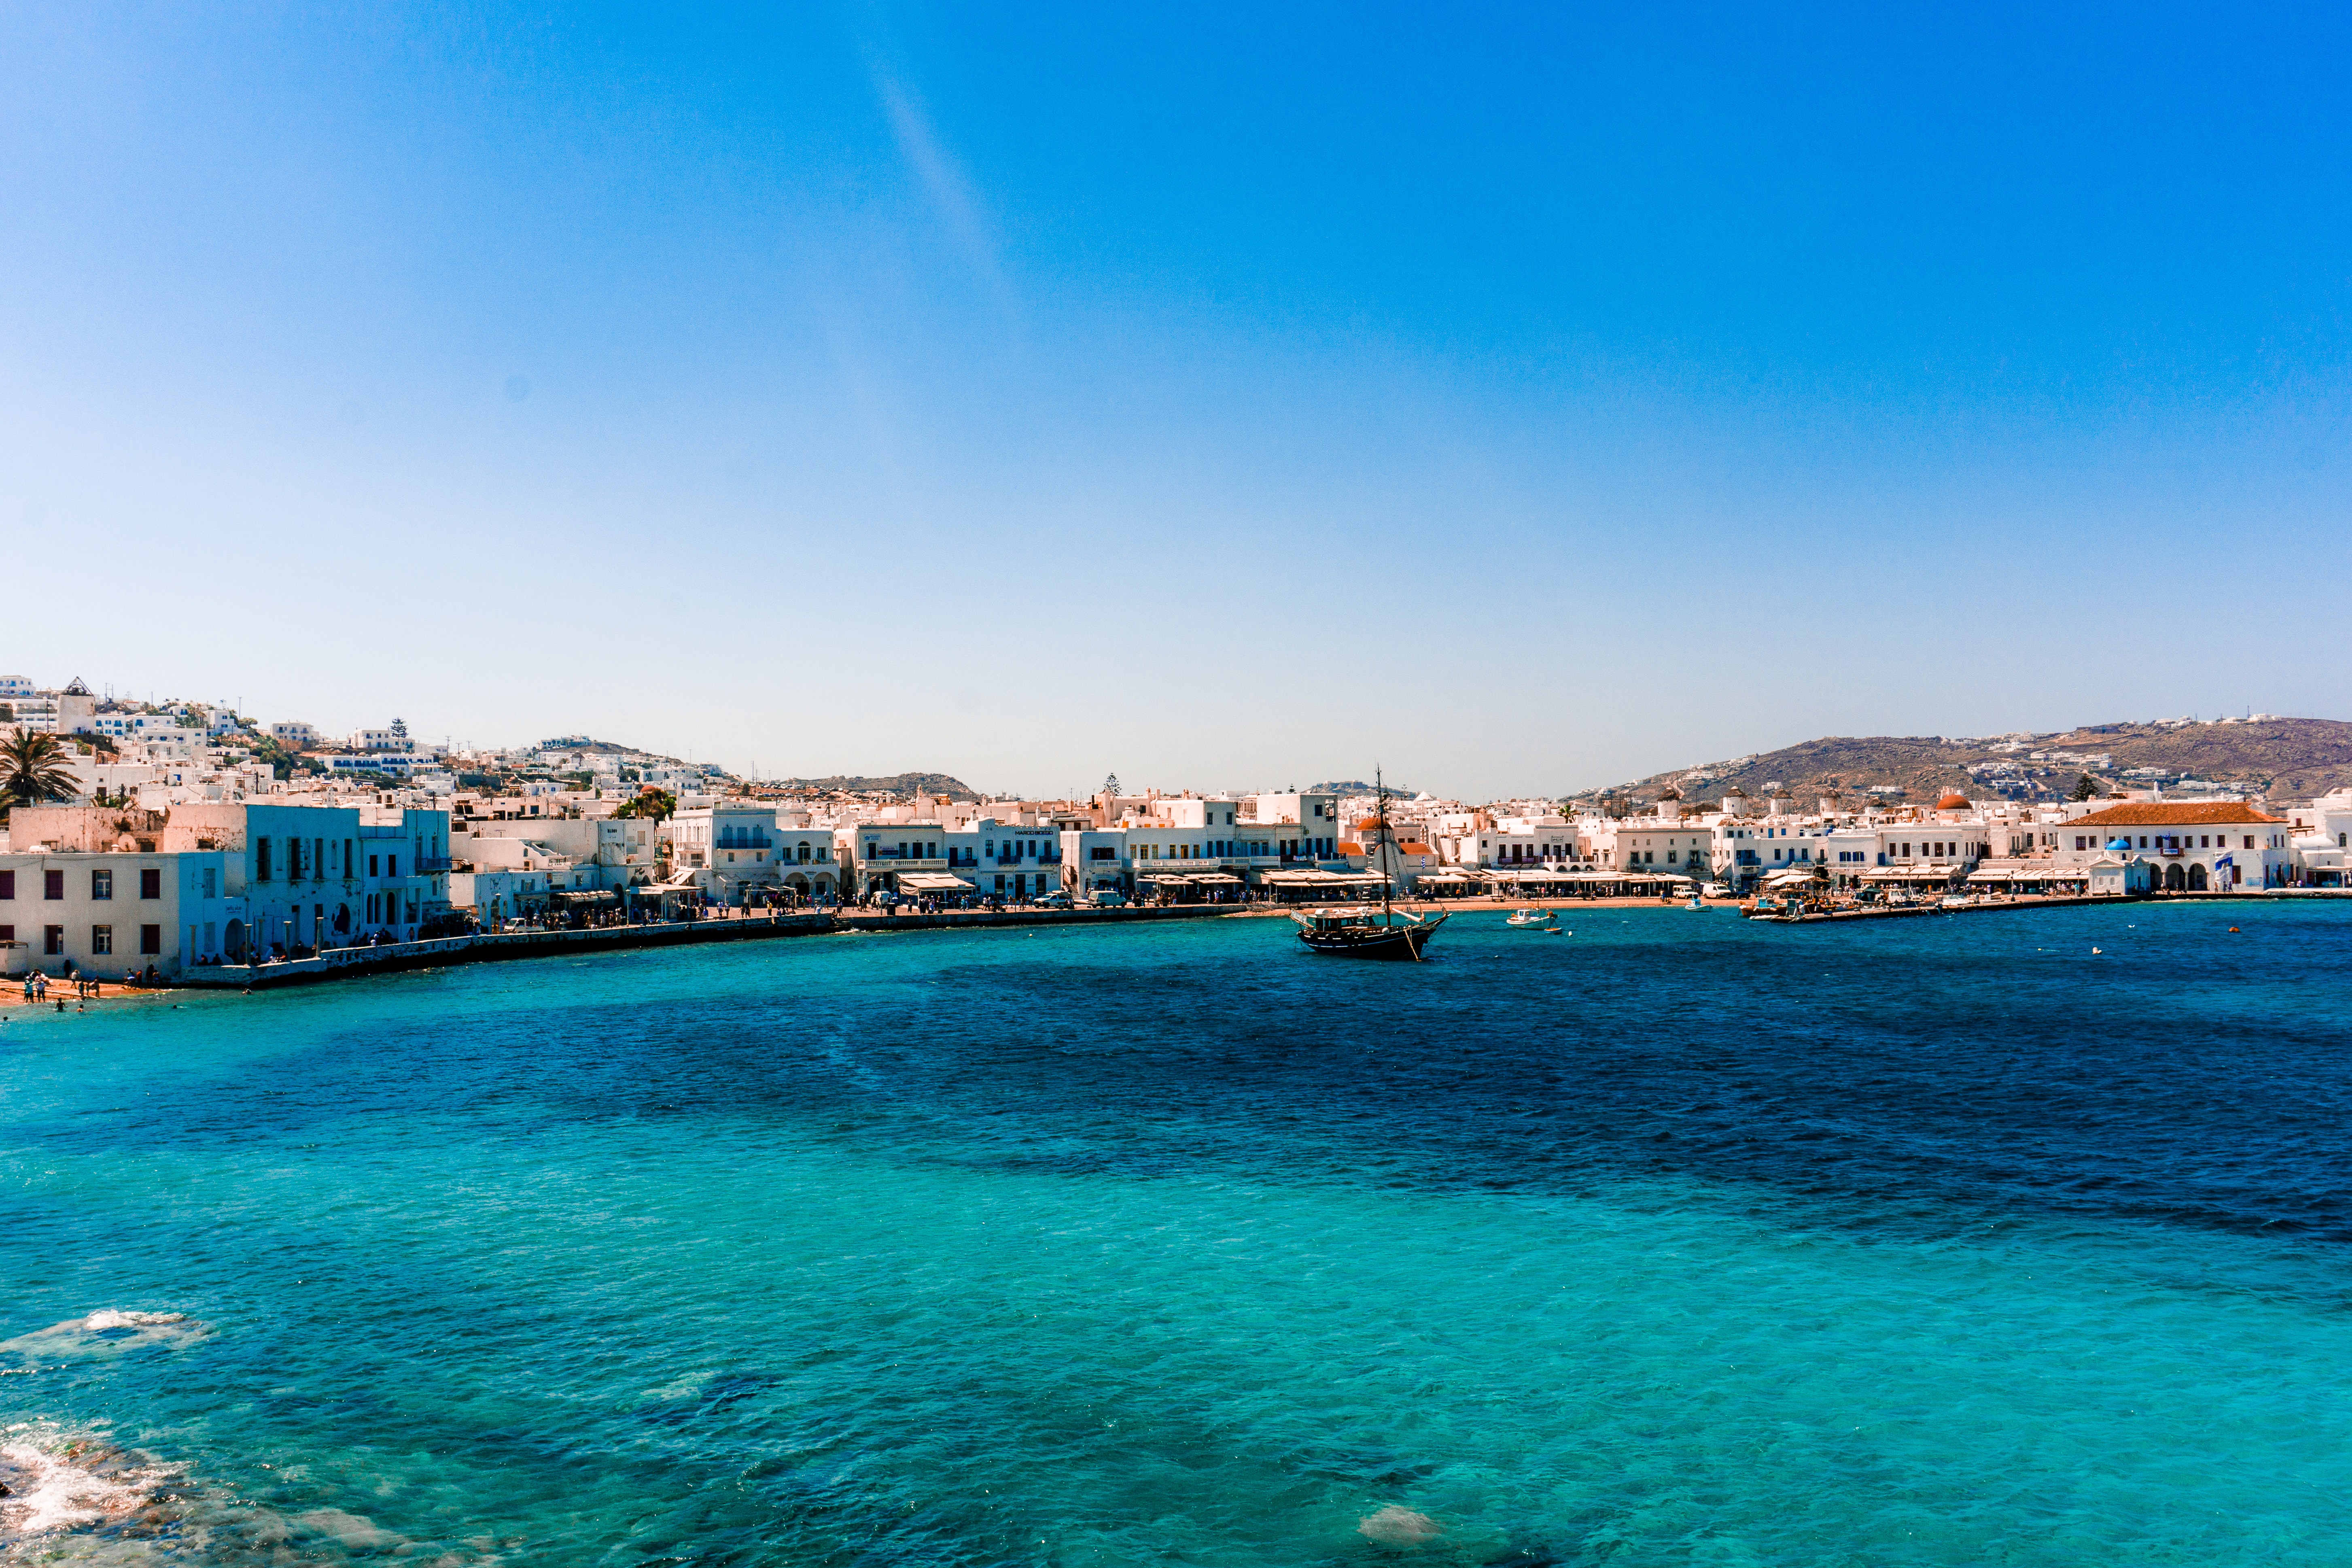 New Boat service in Mykonos supported by Uber boat